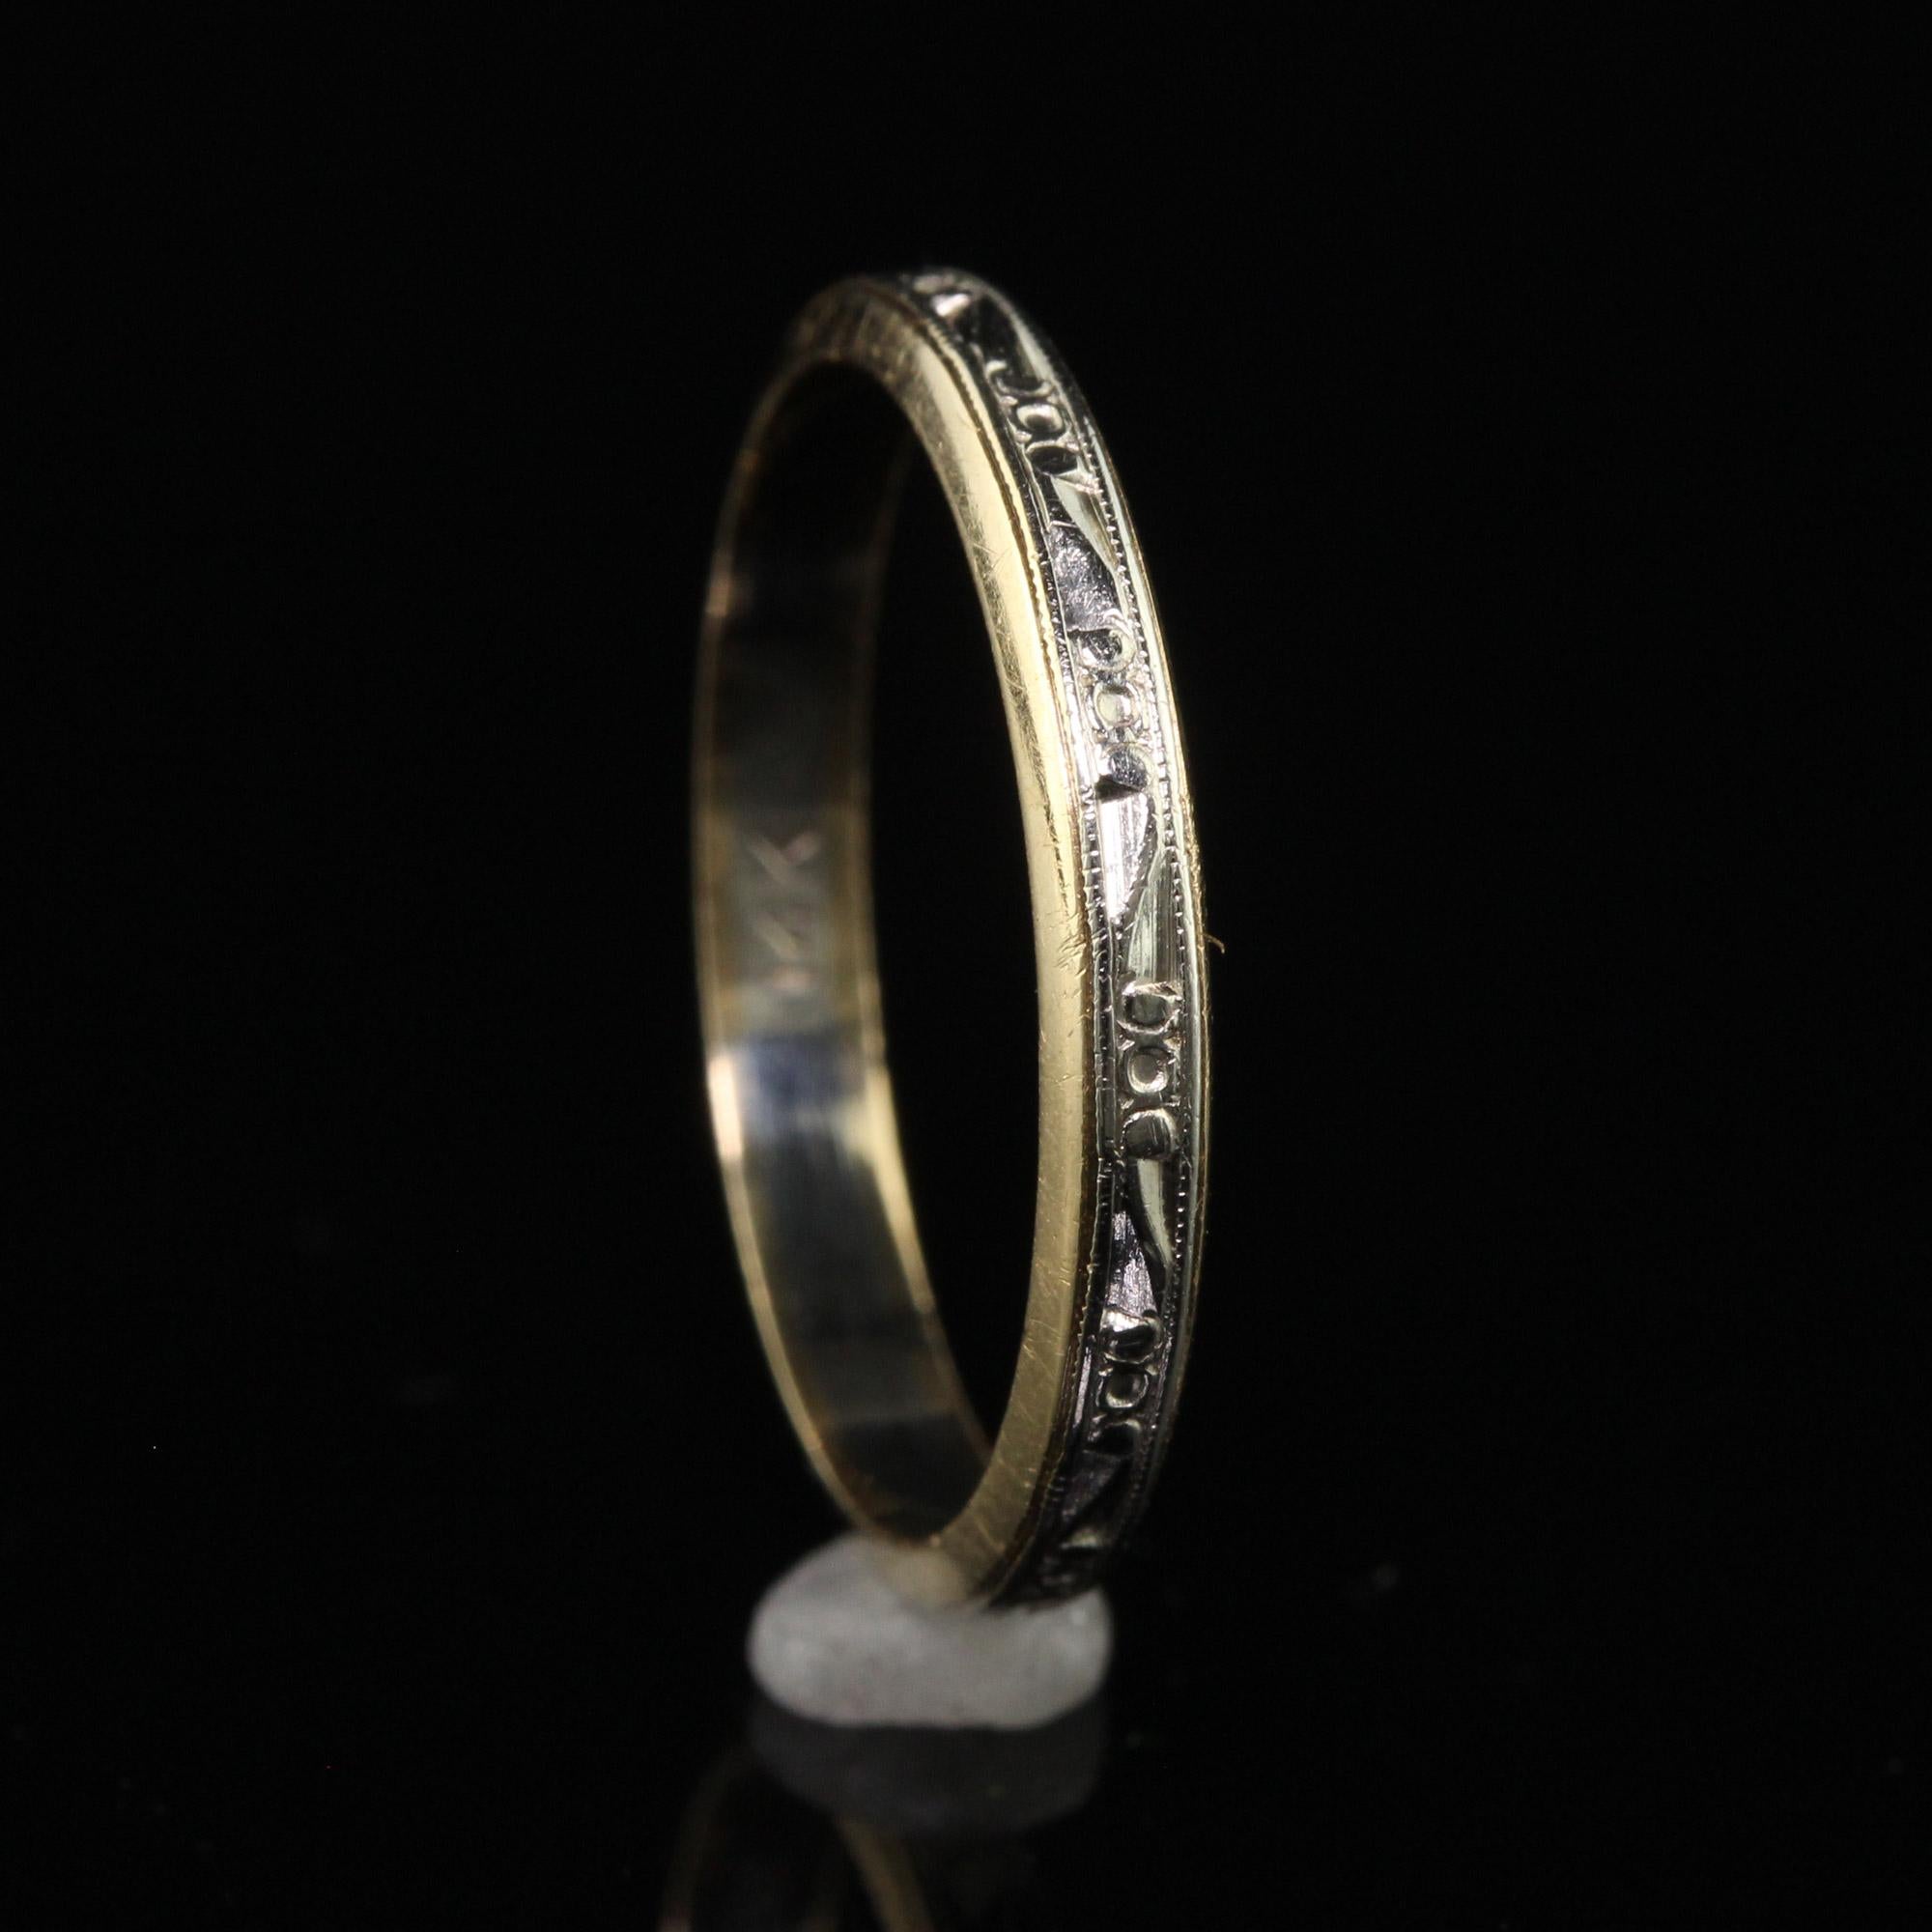 Antique Art Deco 14K Two Tone Engraved Wedding Band - Size 6 1/2 For Sale 1